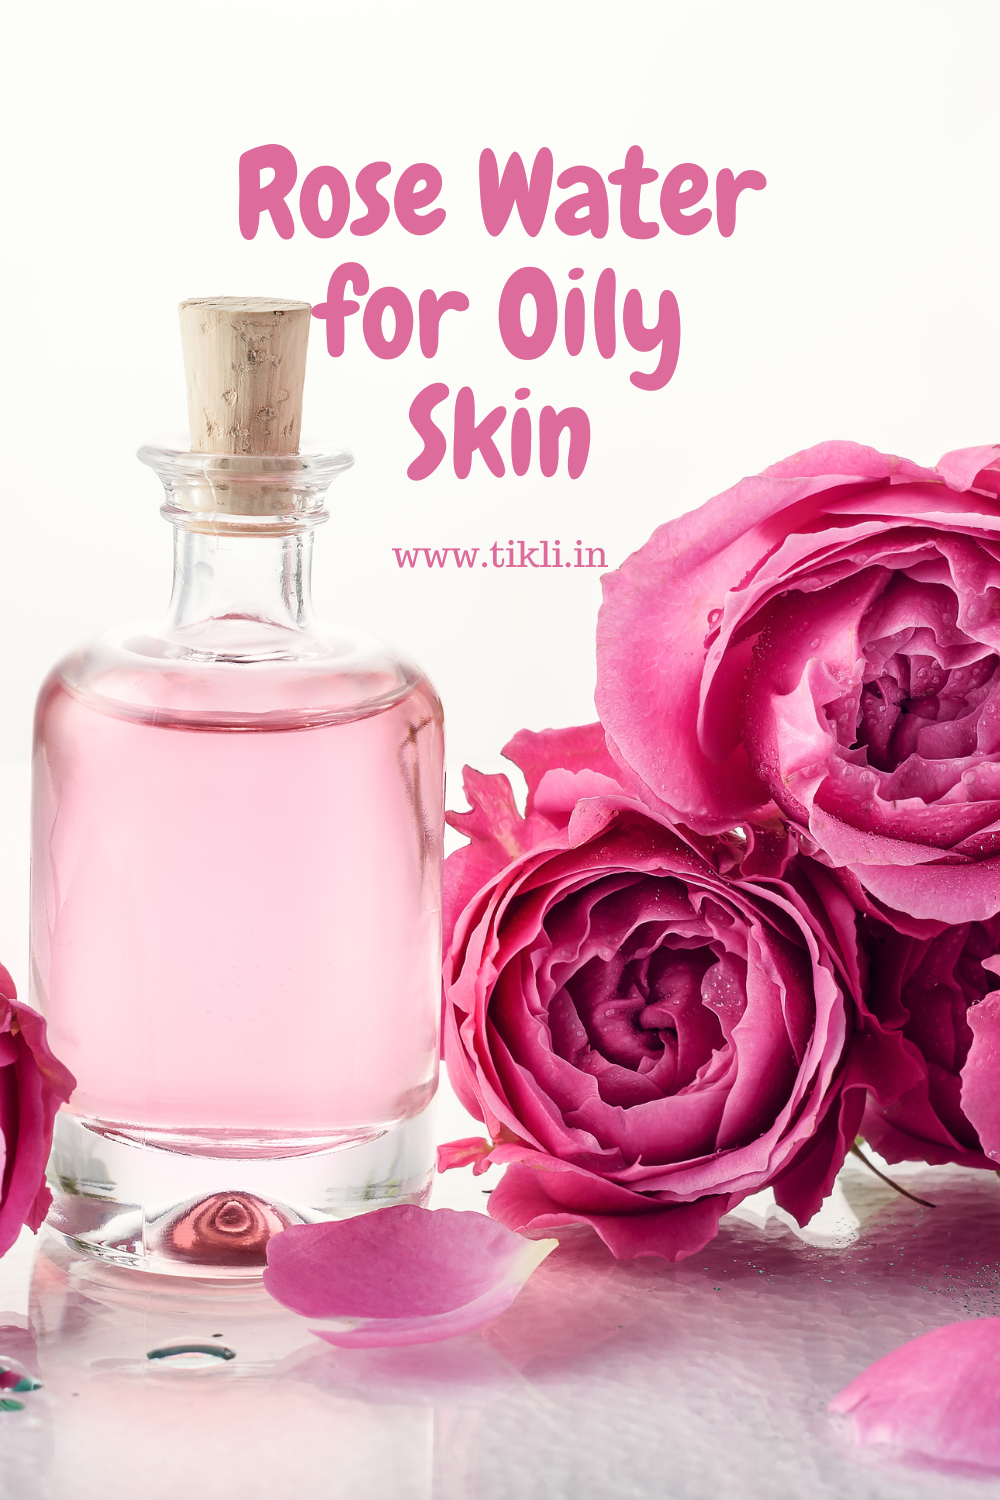 Rose Water for Oily Skin